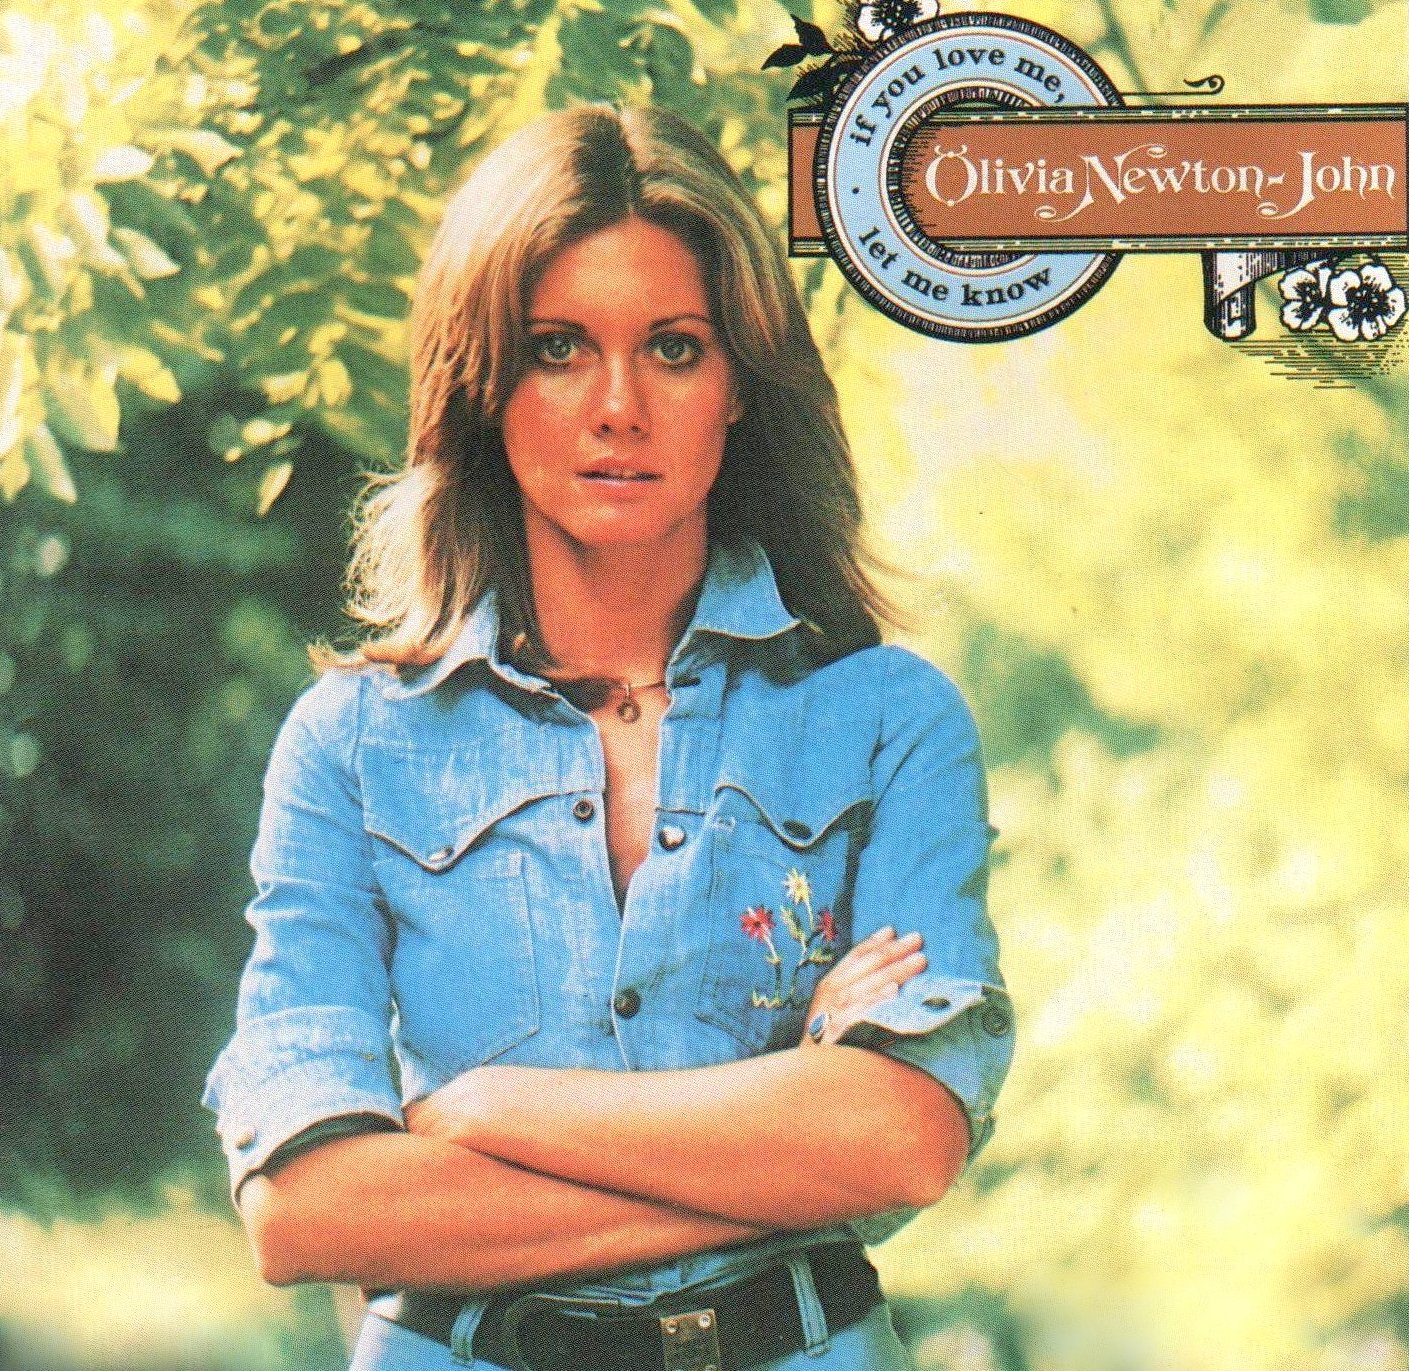 ONE WOMAN'S JOURNEY THE UNOFFICIAL BLOG: Rewinding the Charts: In 1974